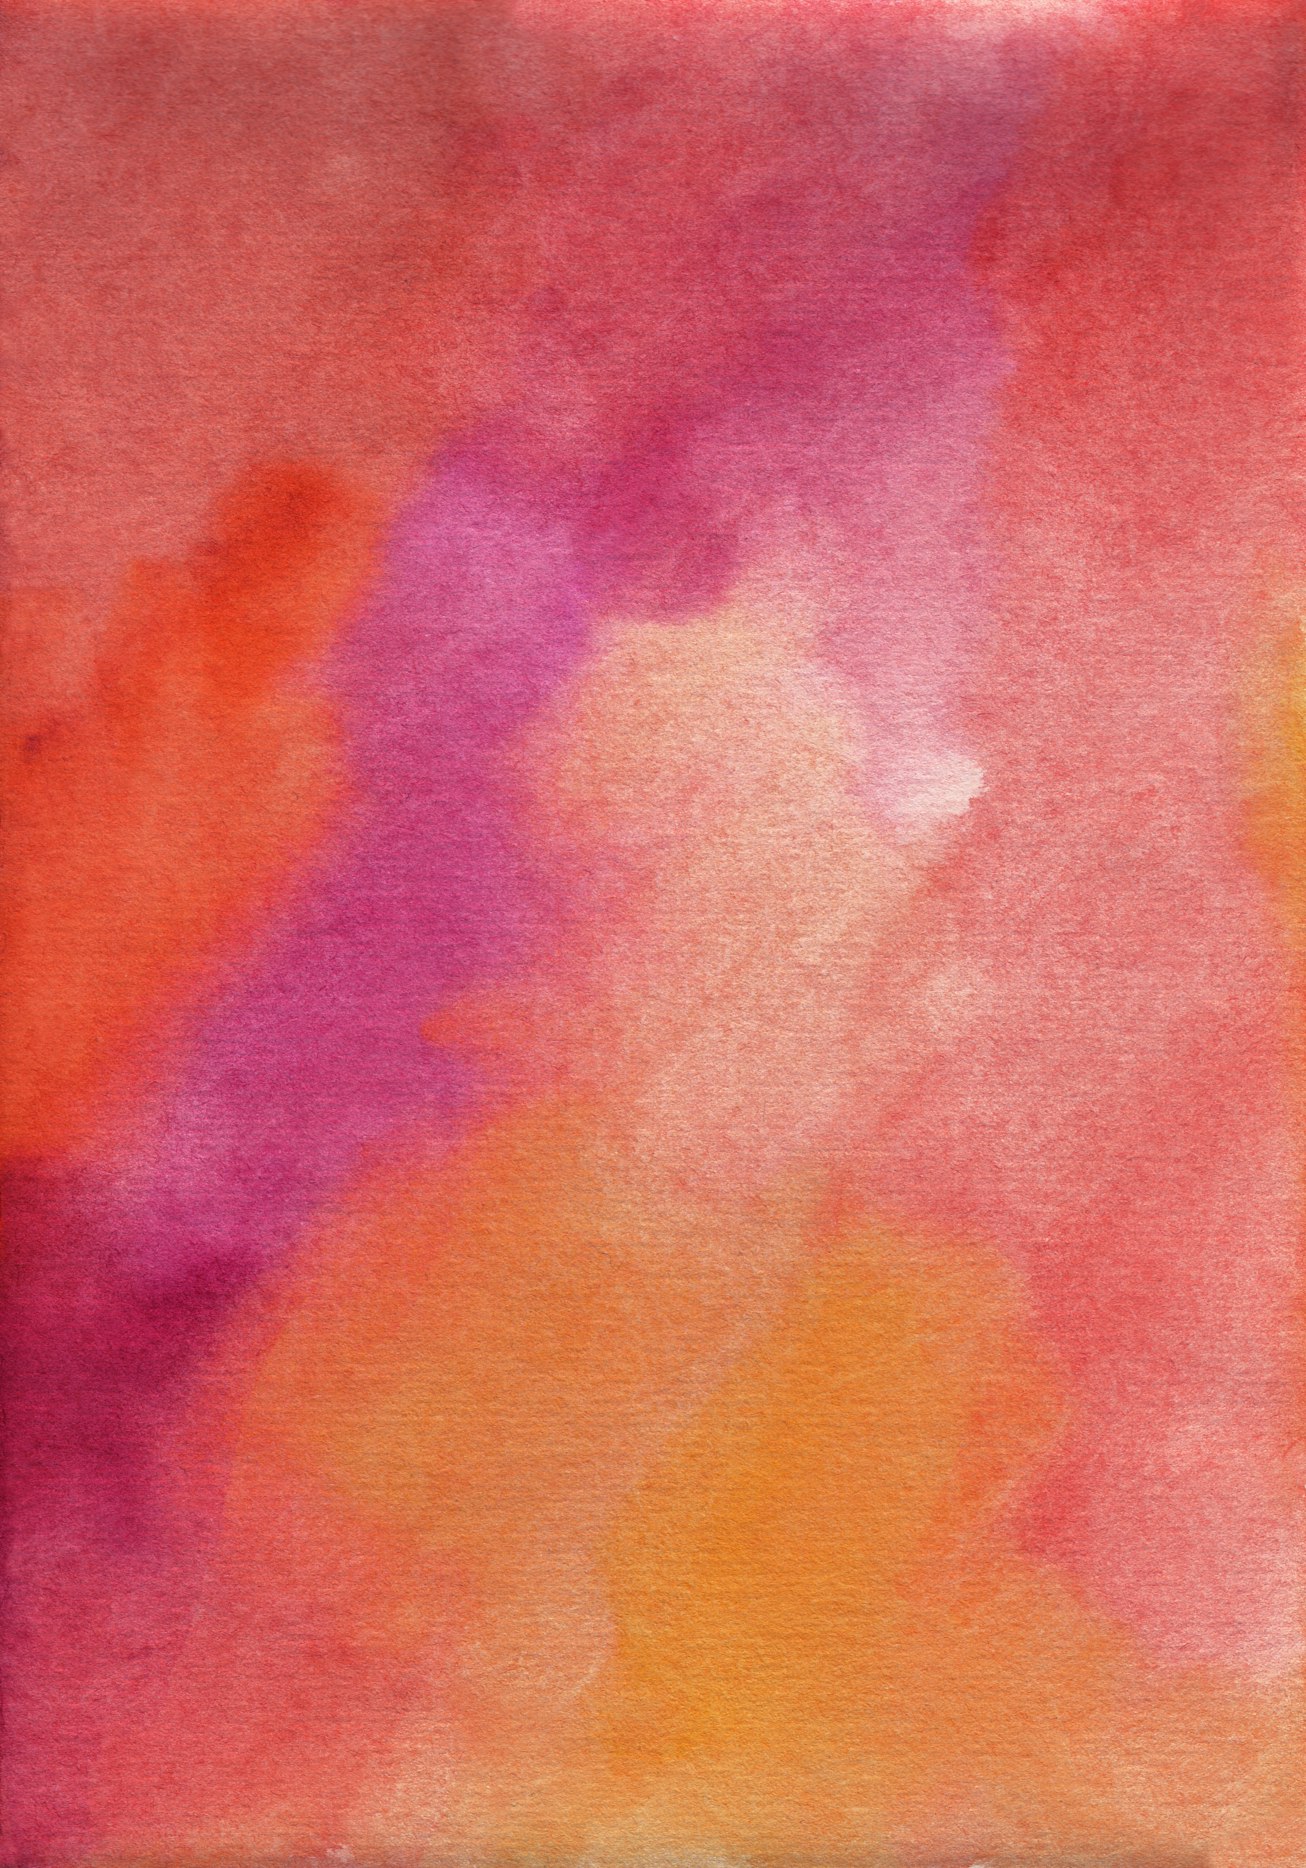 Orange, pink, yellow abstract painting